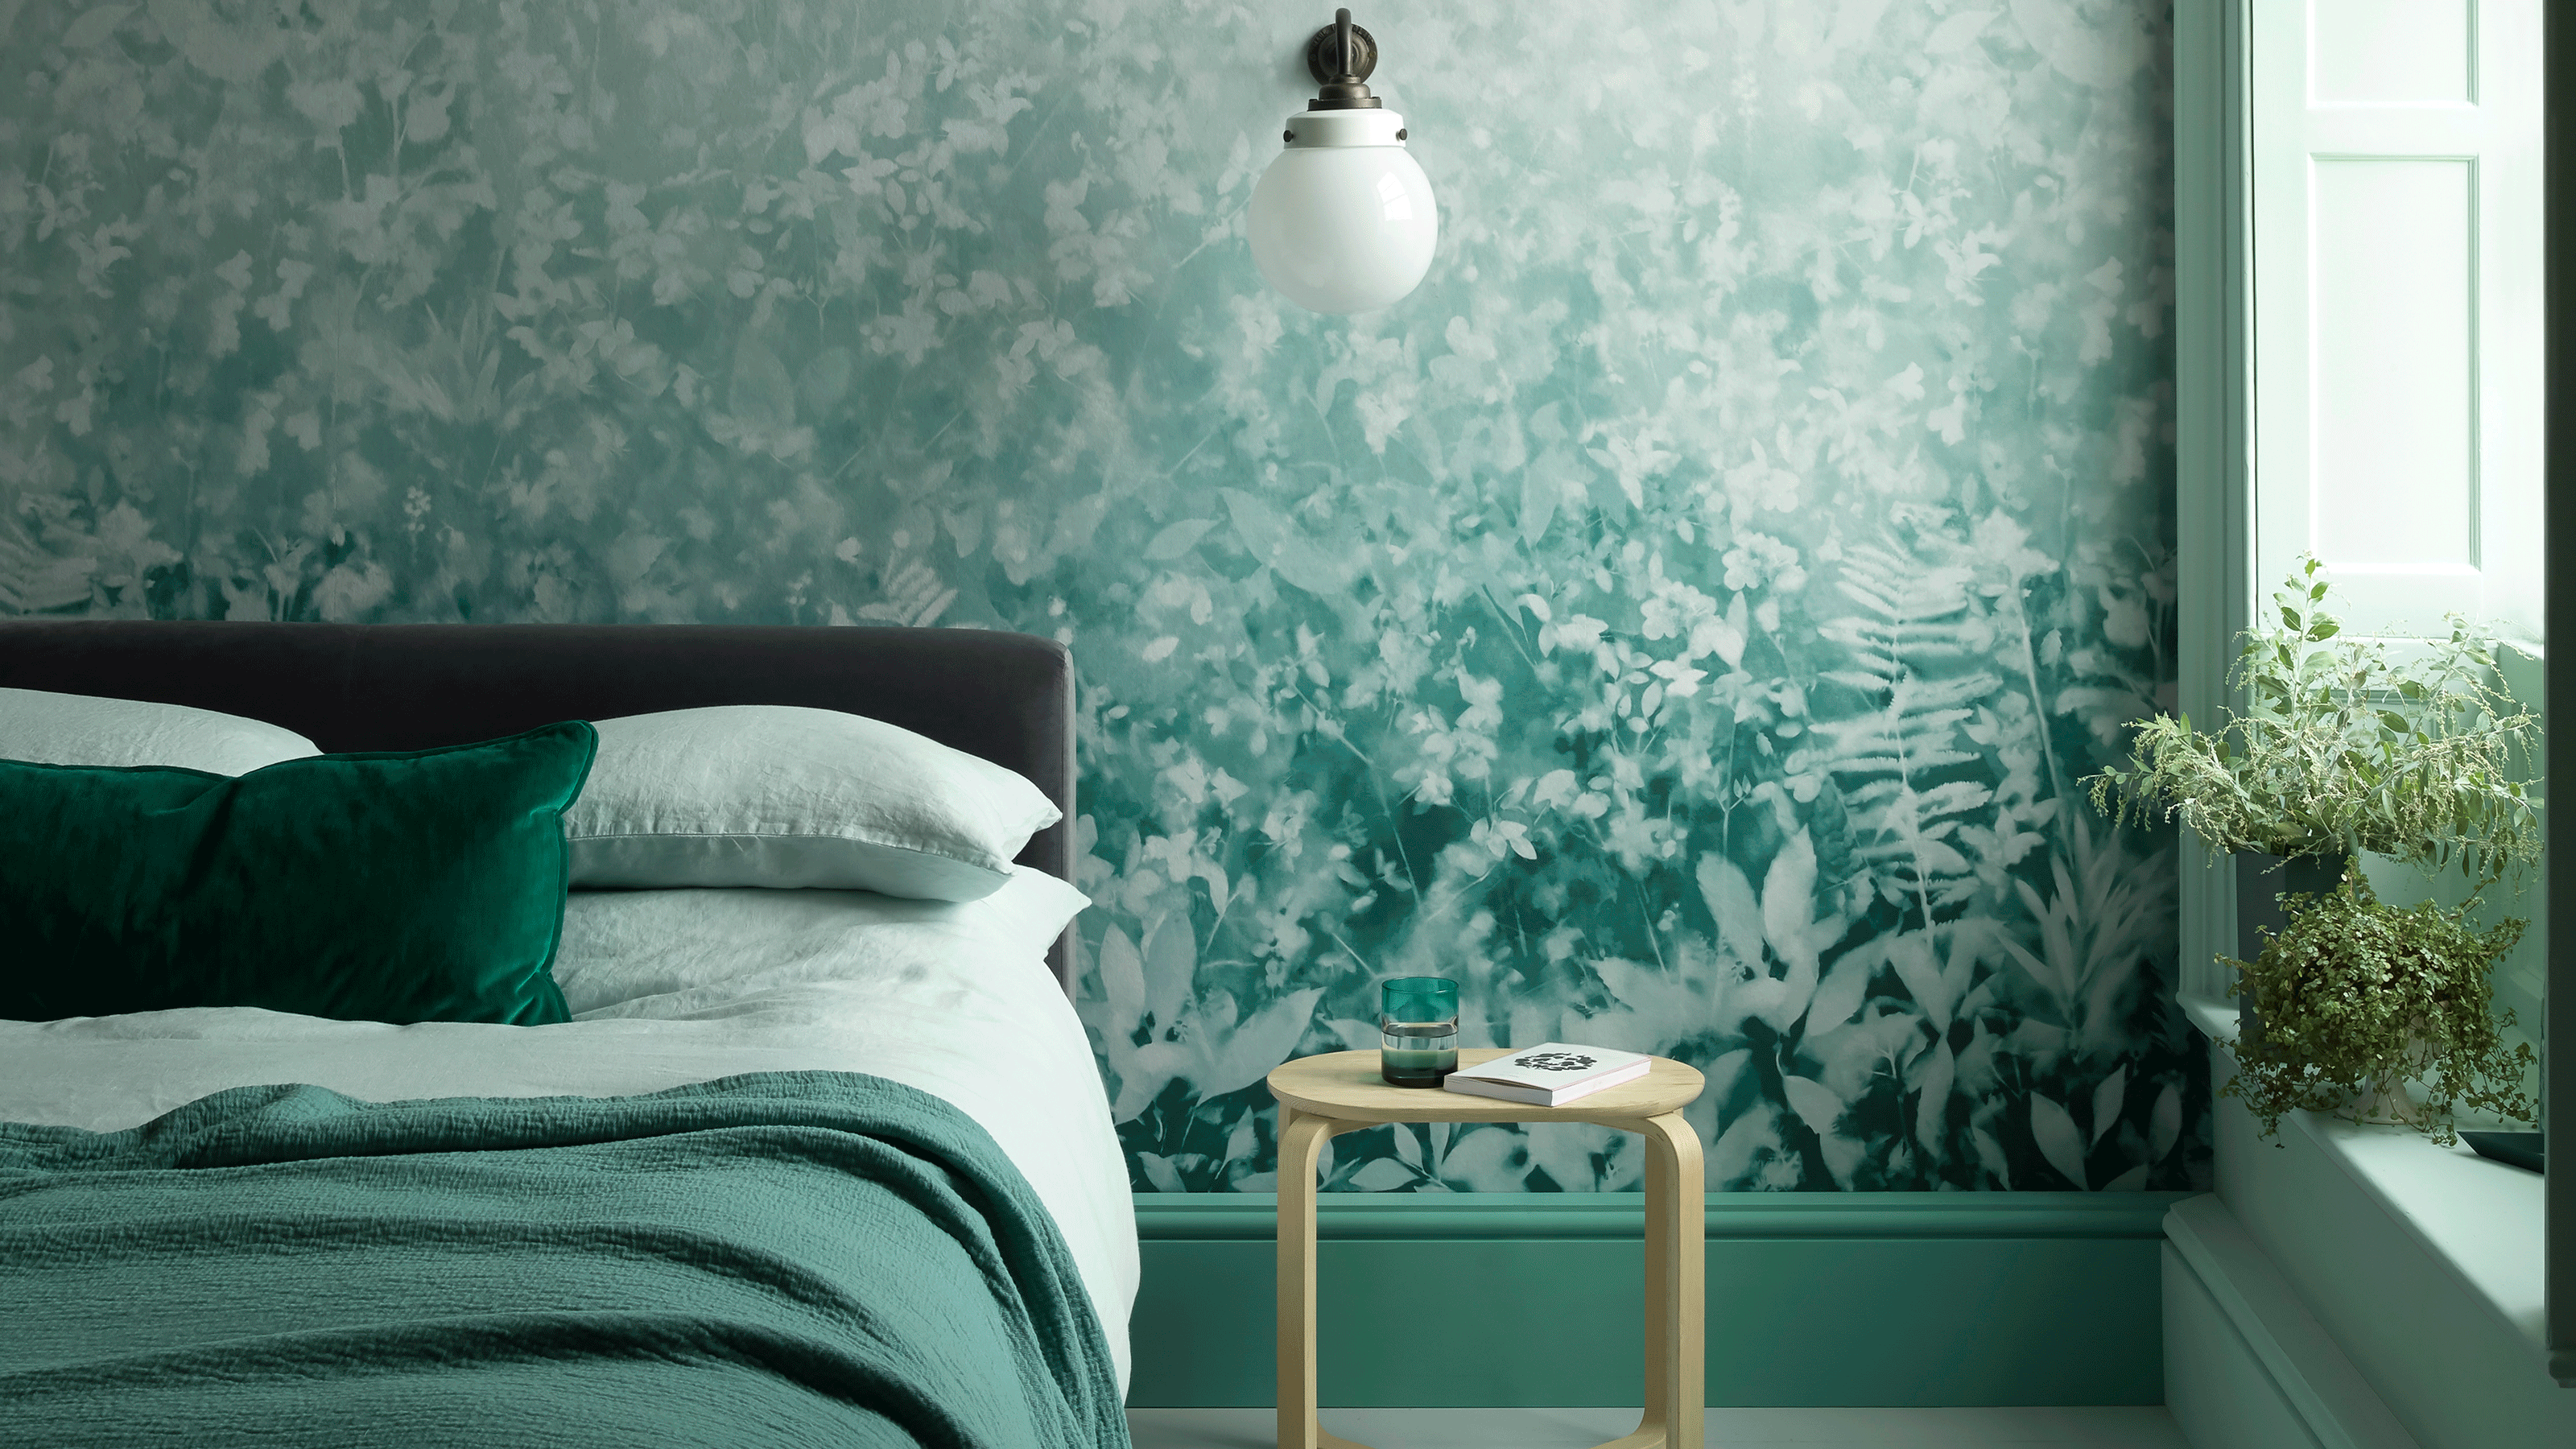 Teal bedroom with teal patterned wallpaper